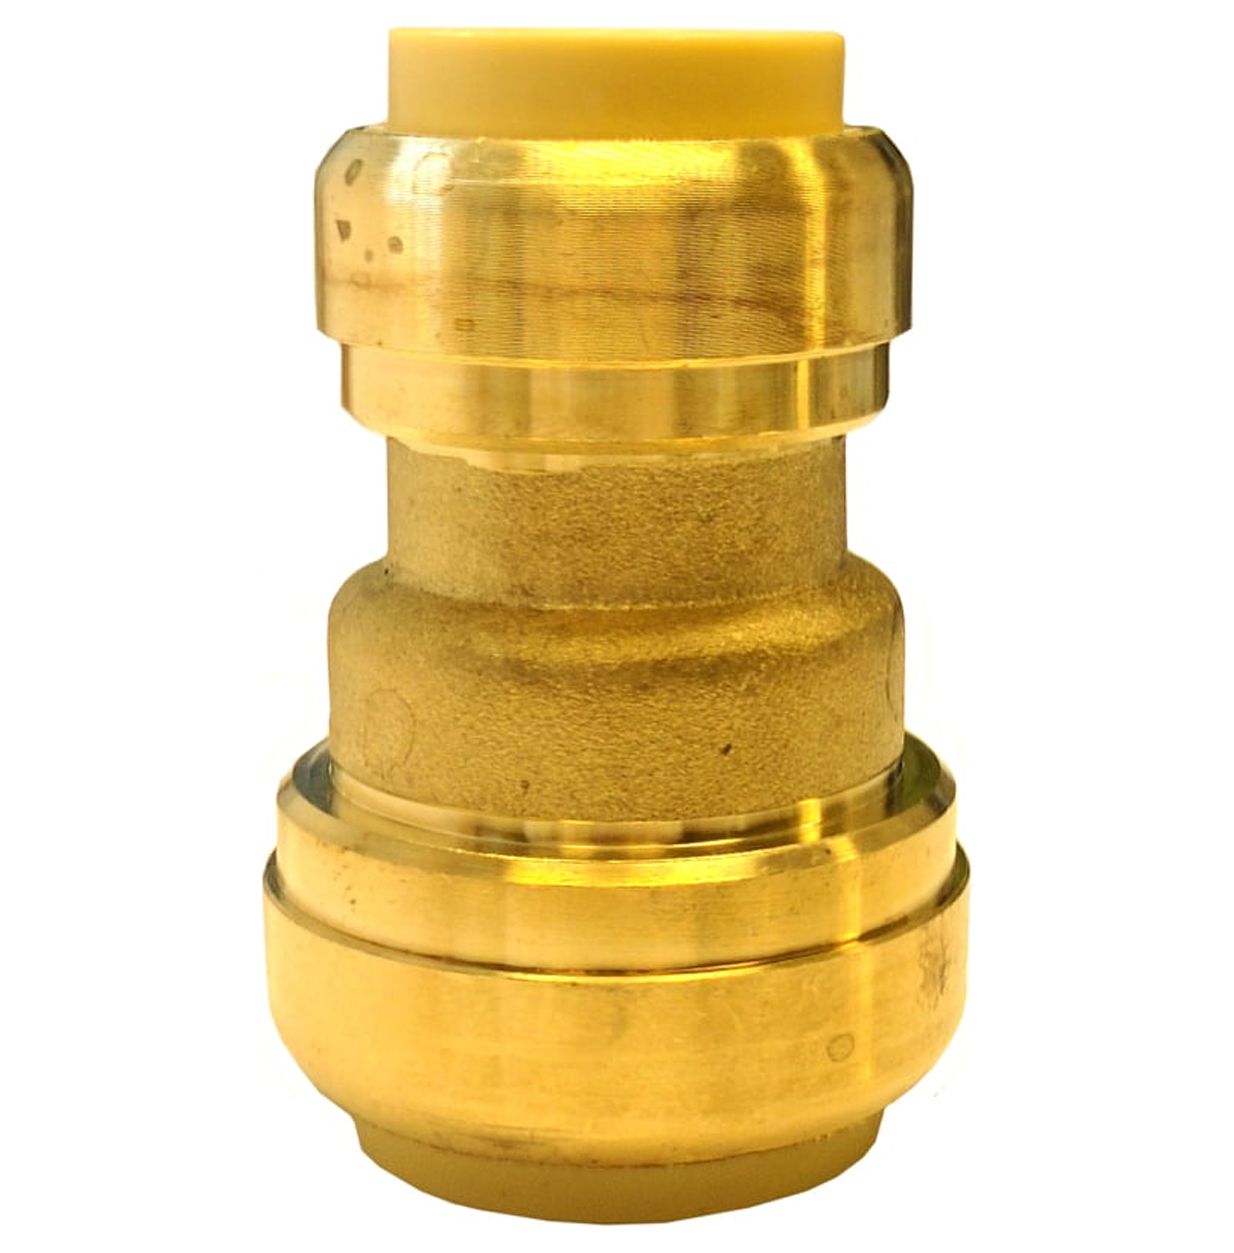 Libra Supply Lead Free 1-1/2 x 1-1/4 inch Push-Fit Coupling, Push to Connect, (Click in for more size options), 1-1/2'' x 1-1/4'', 1-1/2 x 1-1/4-inch, Fits copper tubing, CTS, CPVC and PEX - image 4 of 4